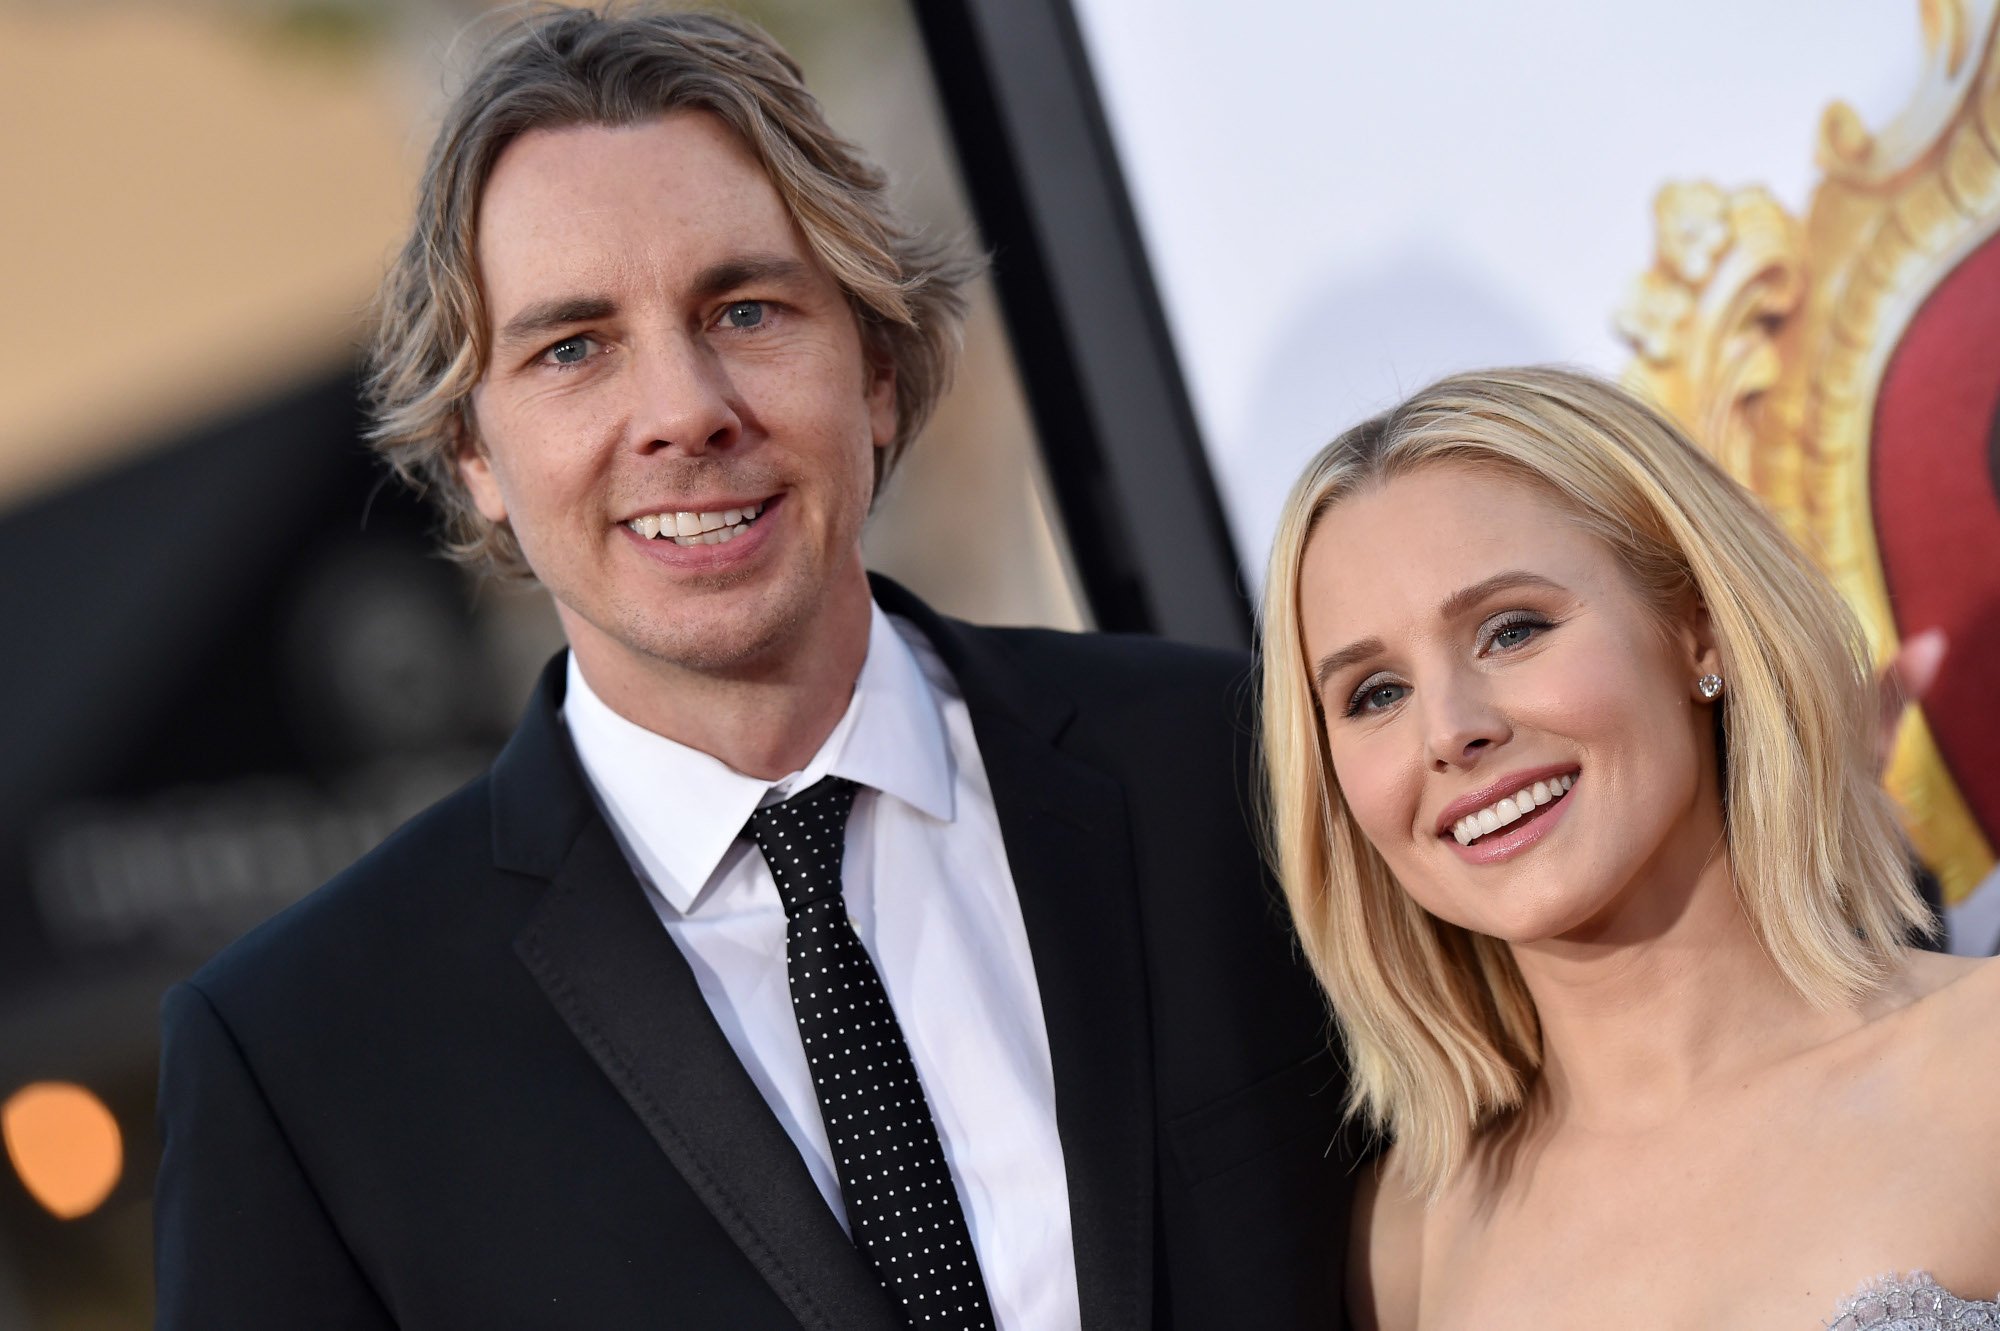 Dax Shepard and Kristen Bell on the red carpet. He's wearing a white shirt, black suit, and black tie and she's wearing a sleeveless dress.